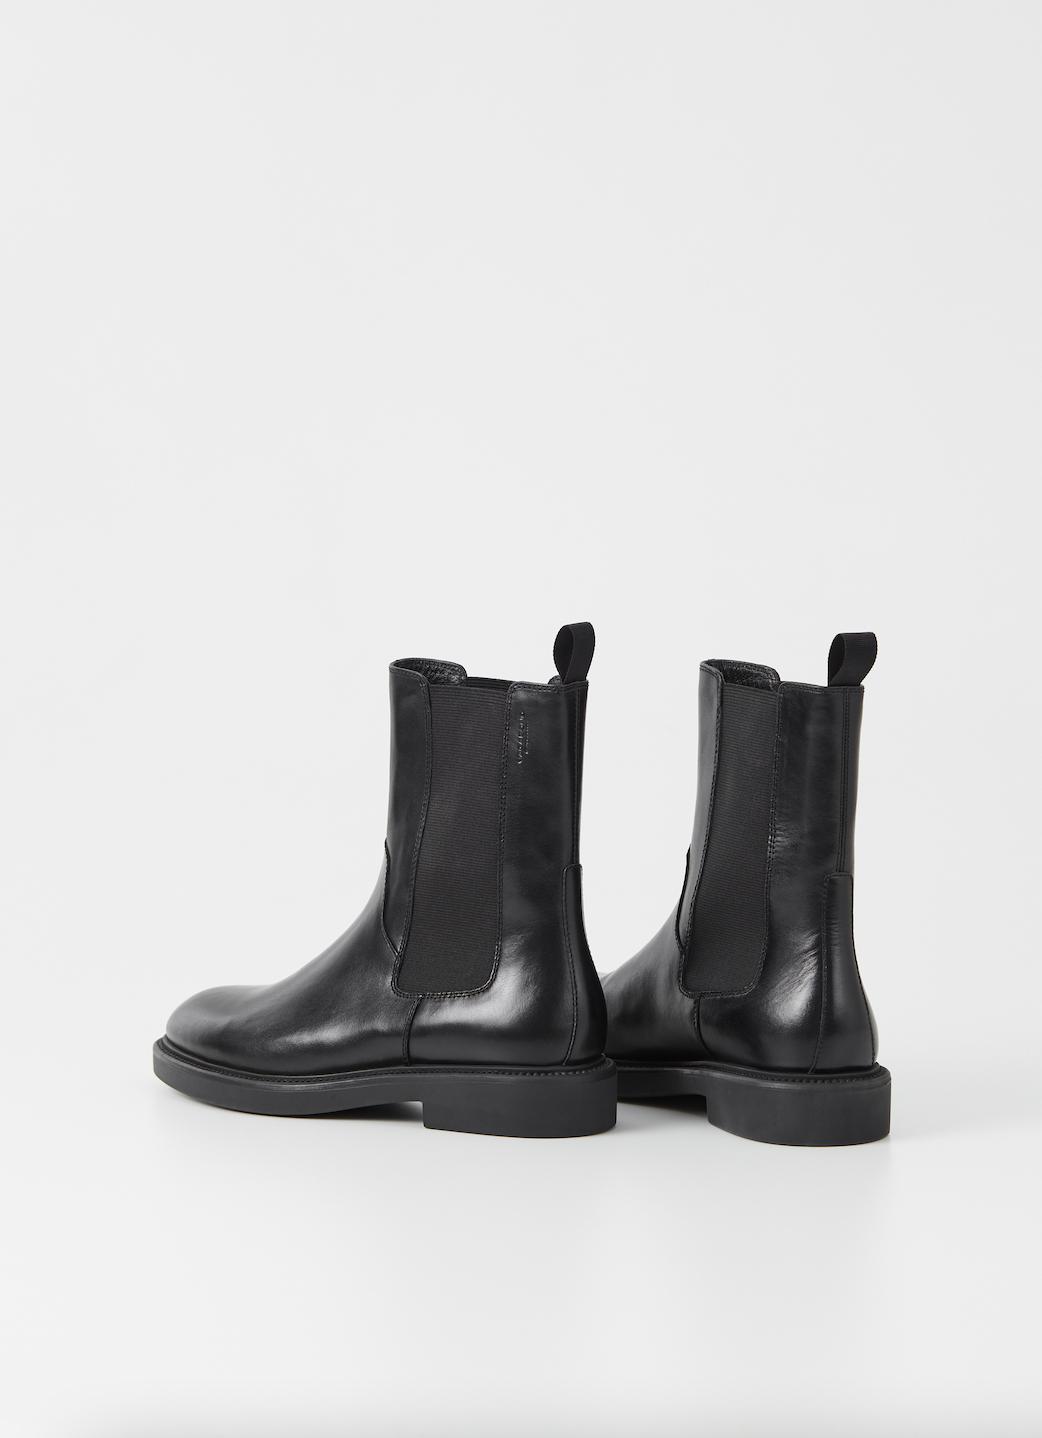 Vagabond Shoemakers Alex W Chelsea Boot in Black | Lyst